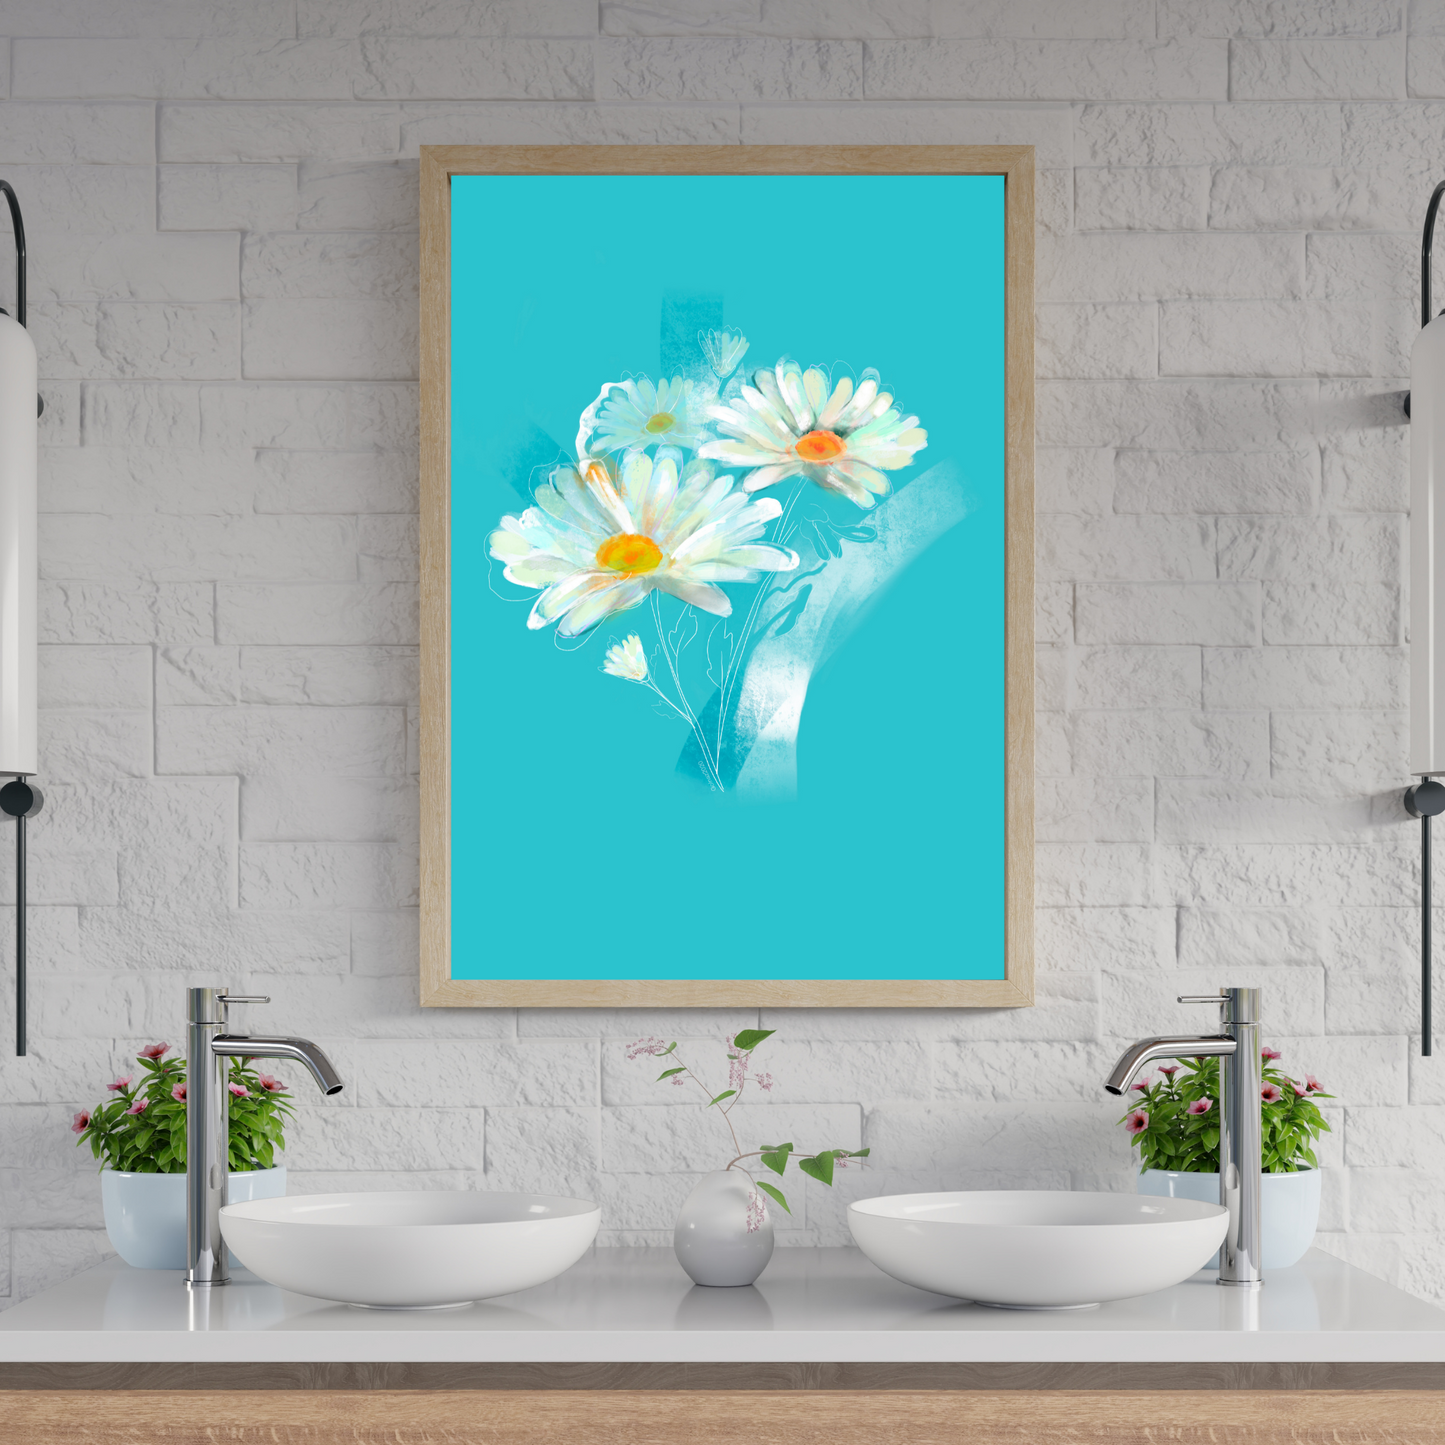 An example of the Daisy painting by ArisaTeam in a bathroom